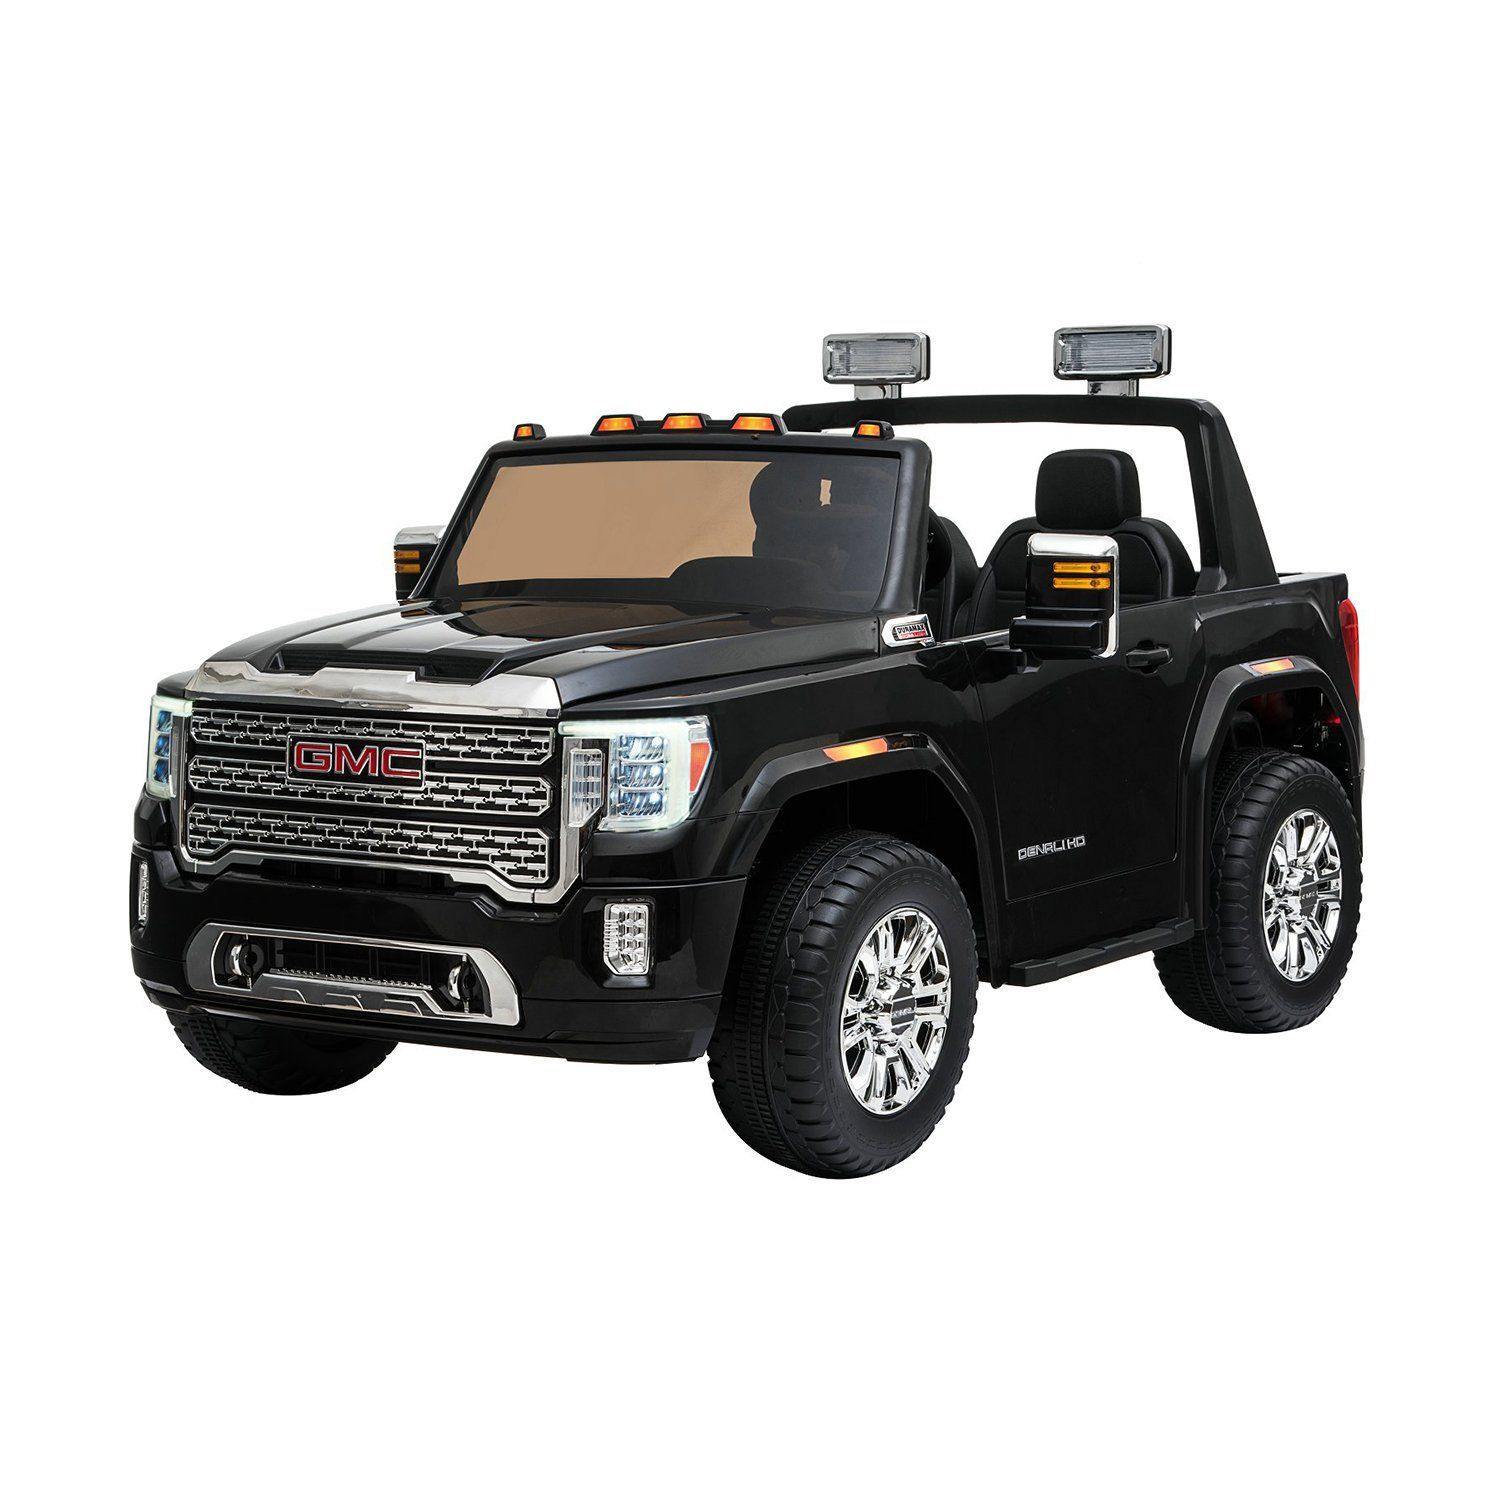 Licensed GMC Denali 24V Battery Operated 2 Seater Ride on Car With Parental Remote Control by Freddo